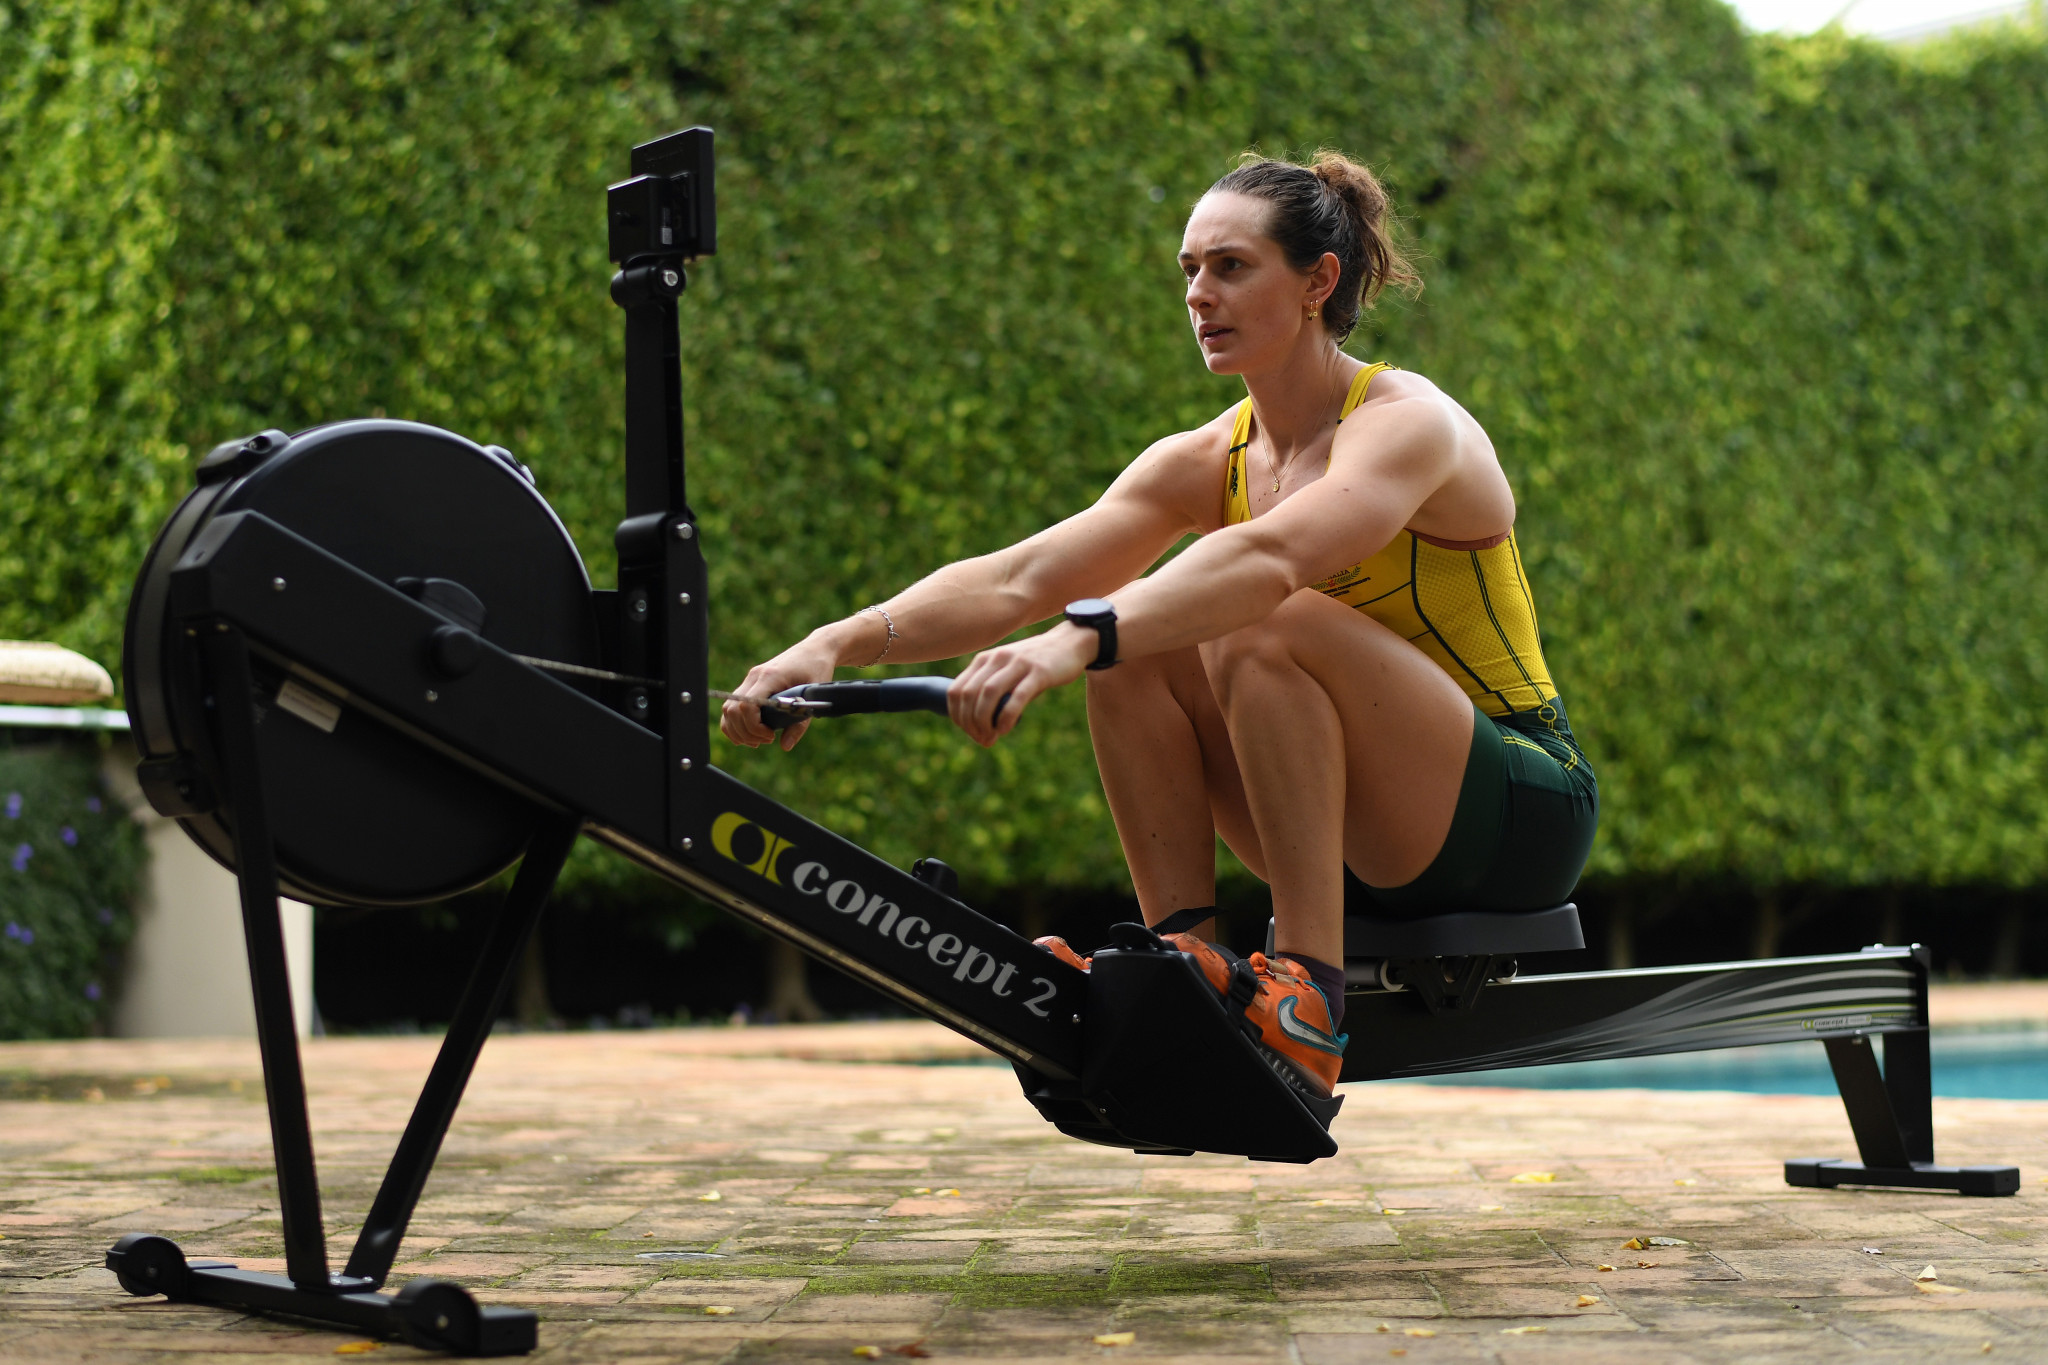 Anyone who can access a Concept2 static rowing machine will be able to enter the 2021 World Rowing Indoor Championships ©Getty Images